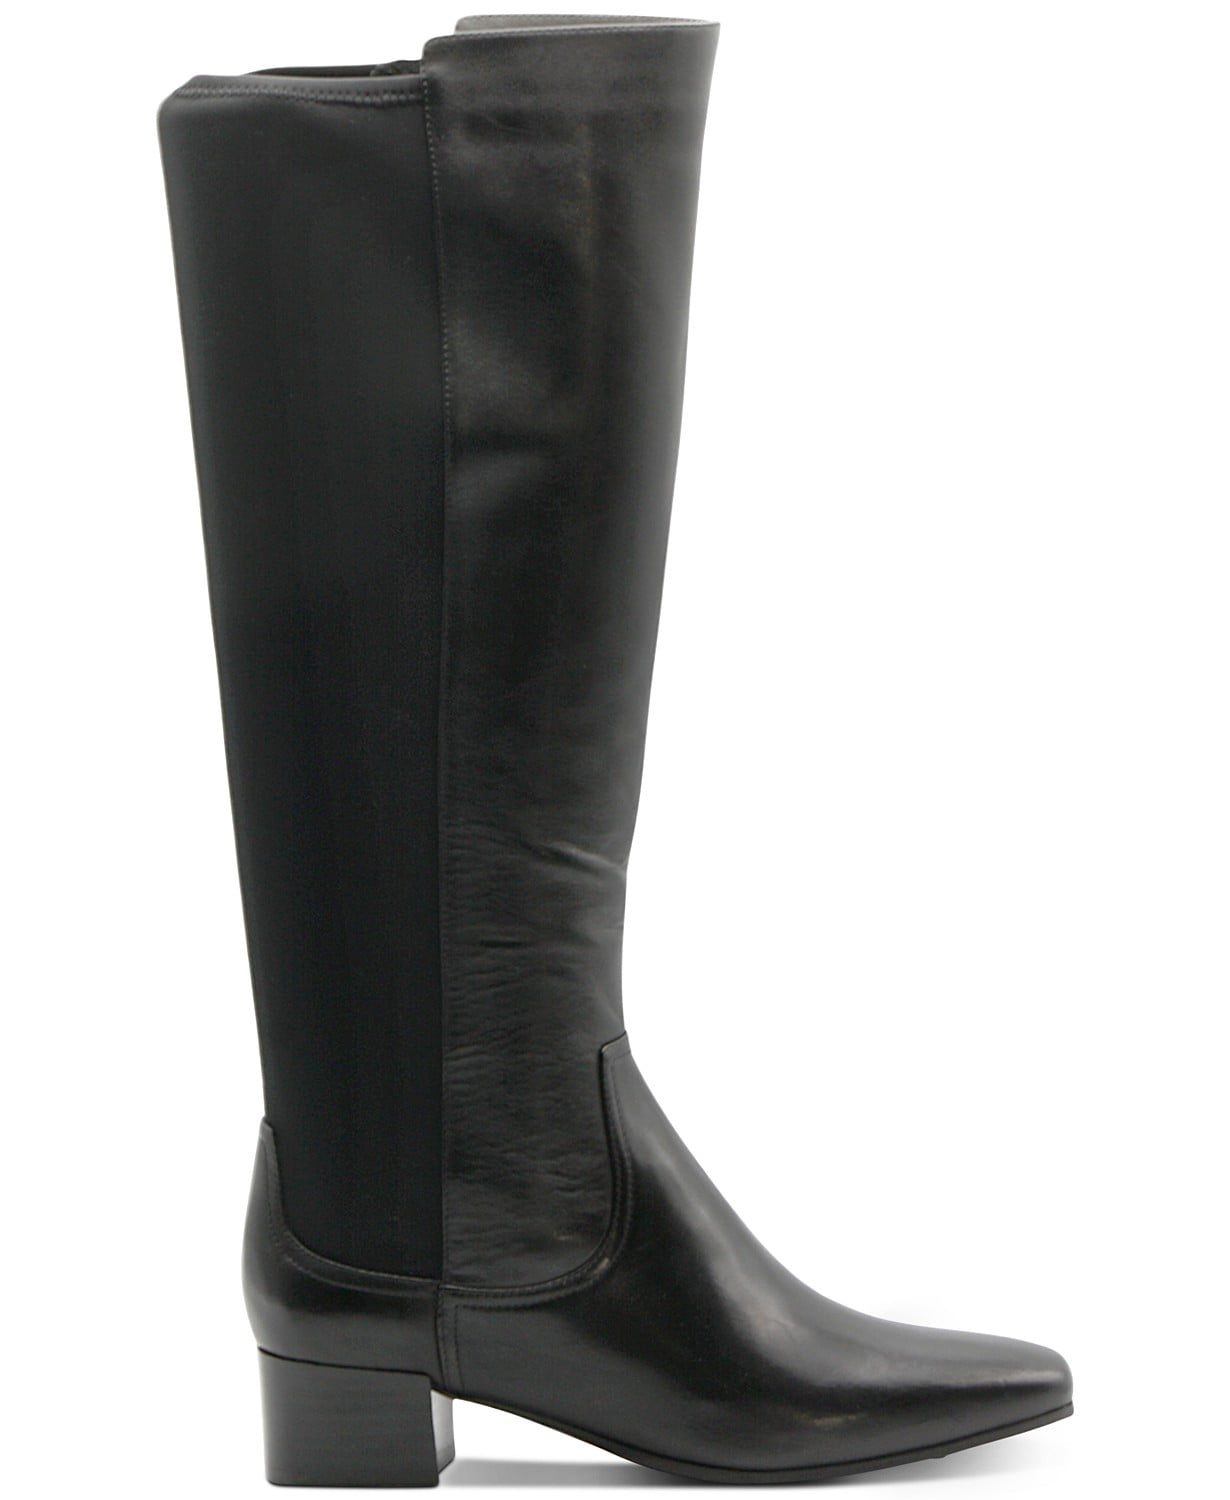 woocommerce-673321-2209615.cloudwaysapps.com-adrienne-vittadini-womens-black-leather-cecil-boots